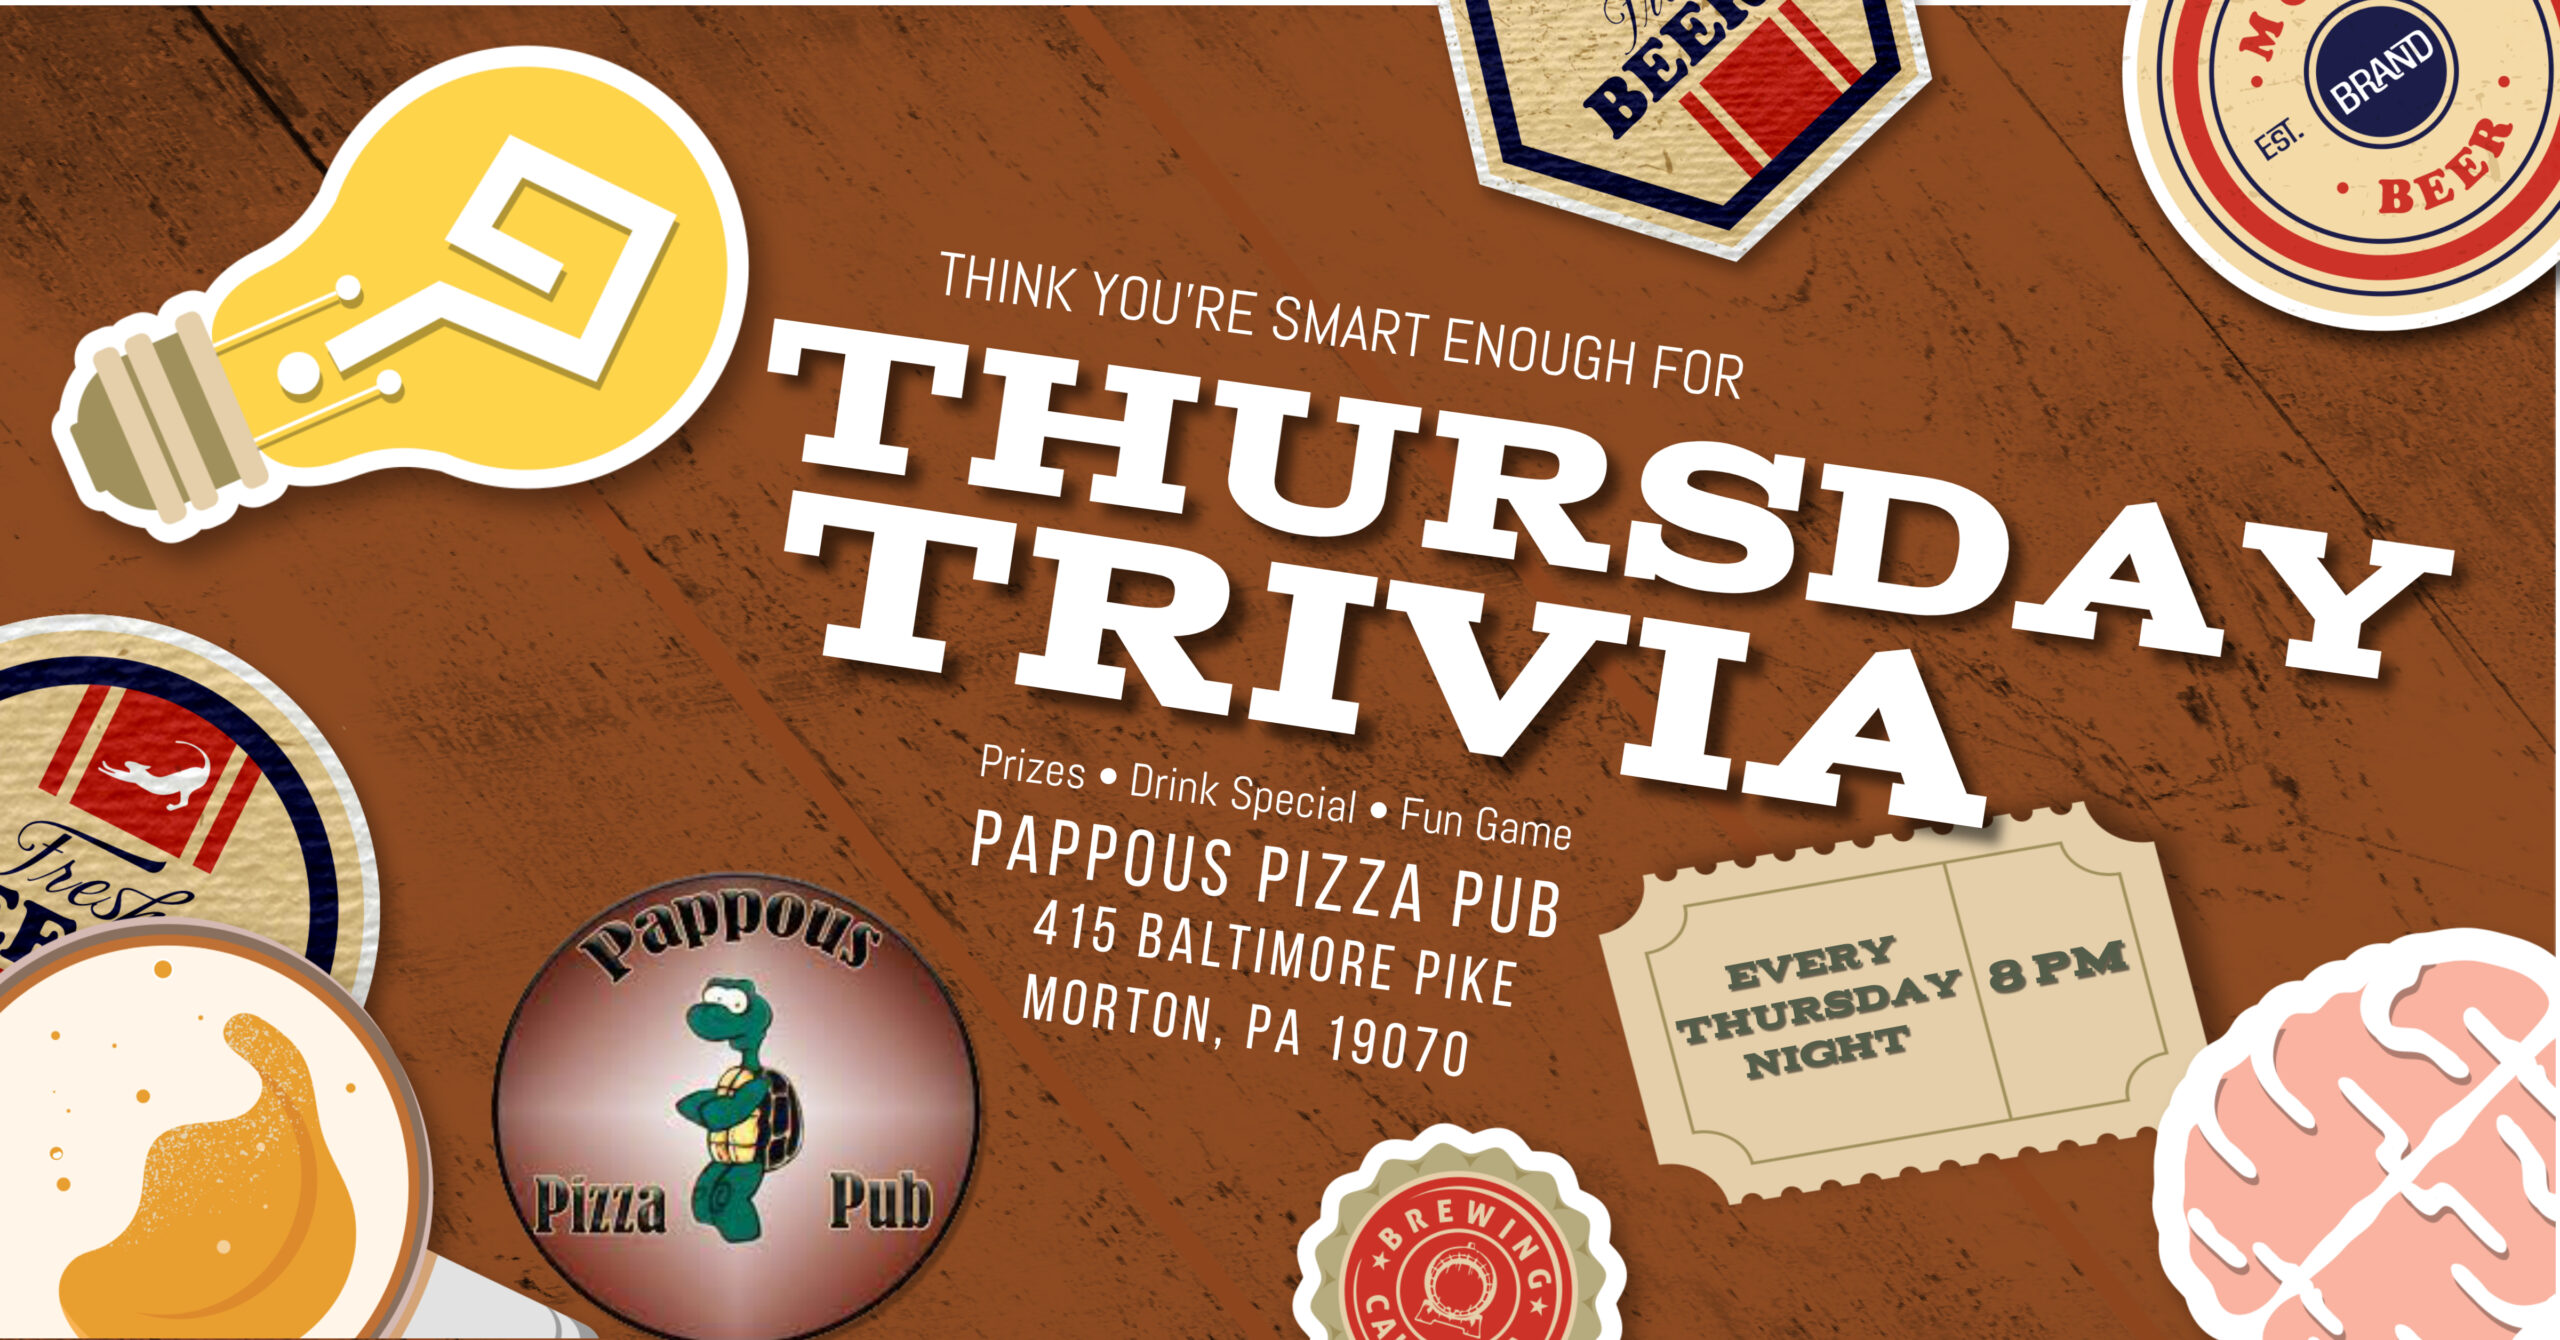 Thursday Trivia Night at Pappous Pizza Pub with DJ KP (Morton - Delaware County, PA)